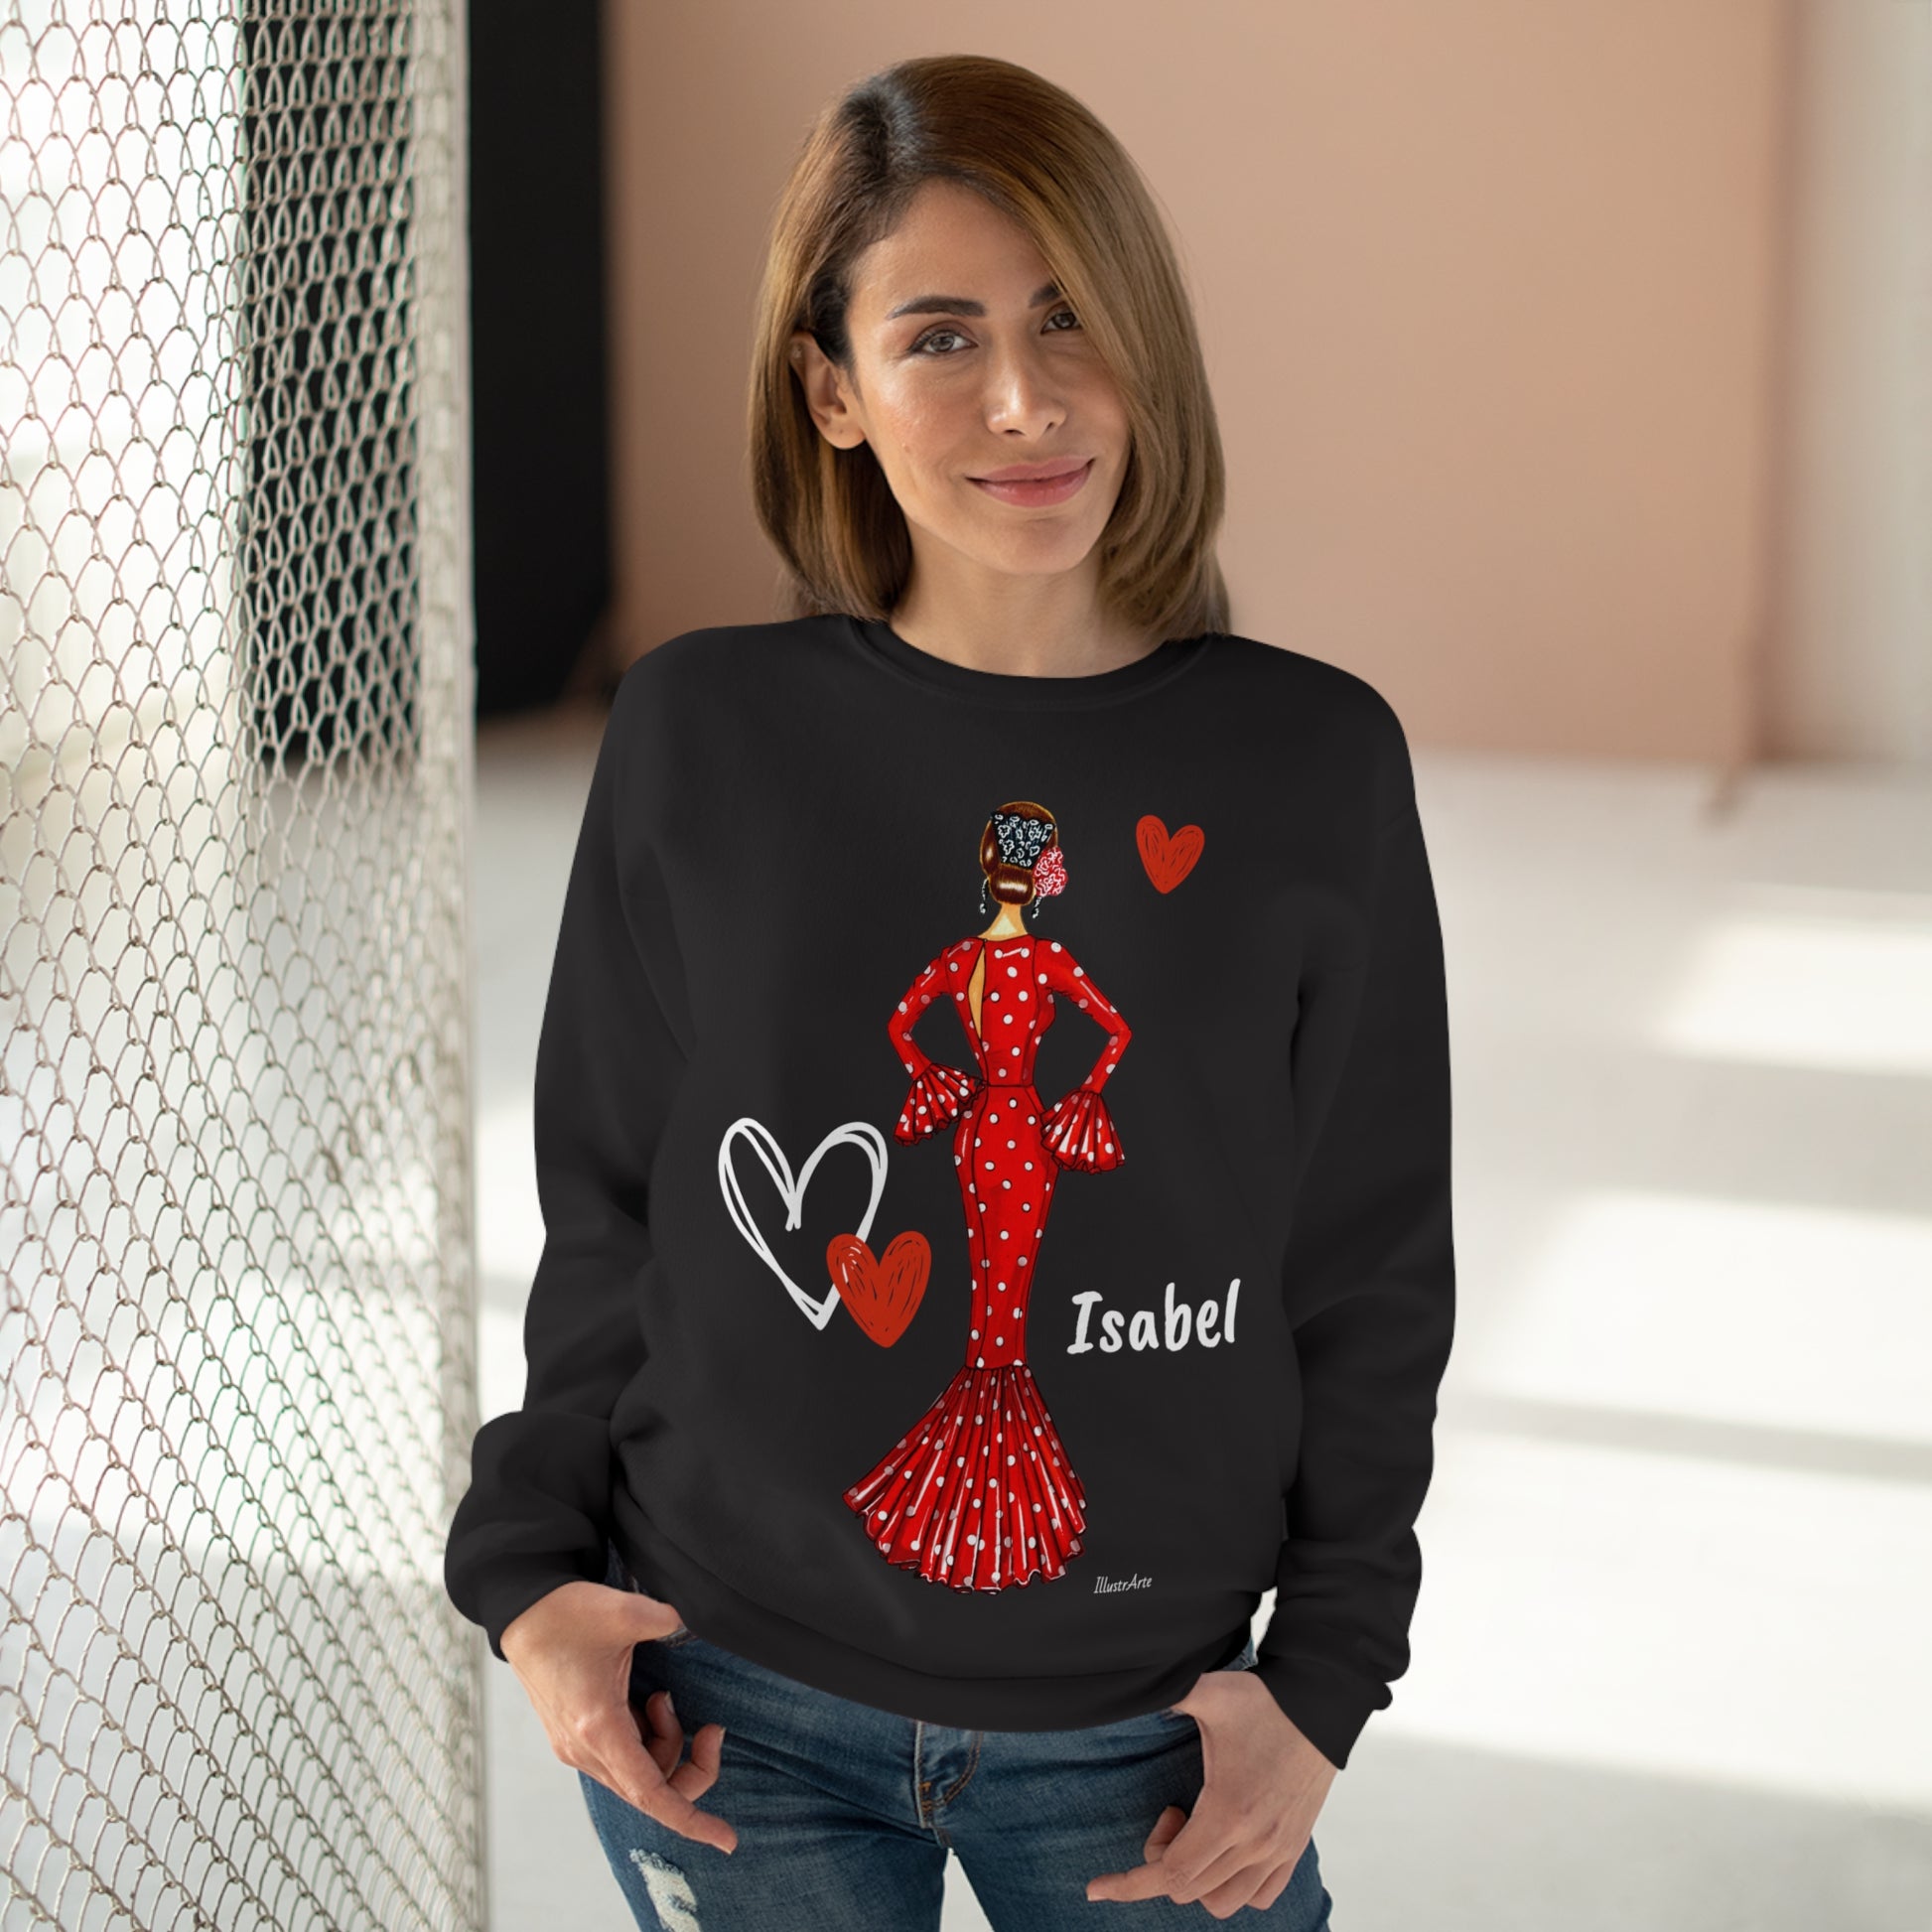 a woman wearing a black sweater with a red dress and hearts on it